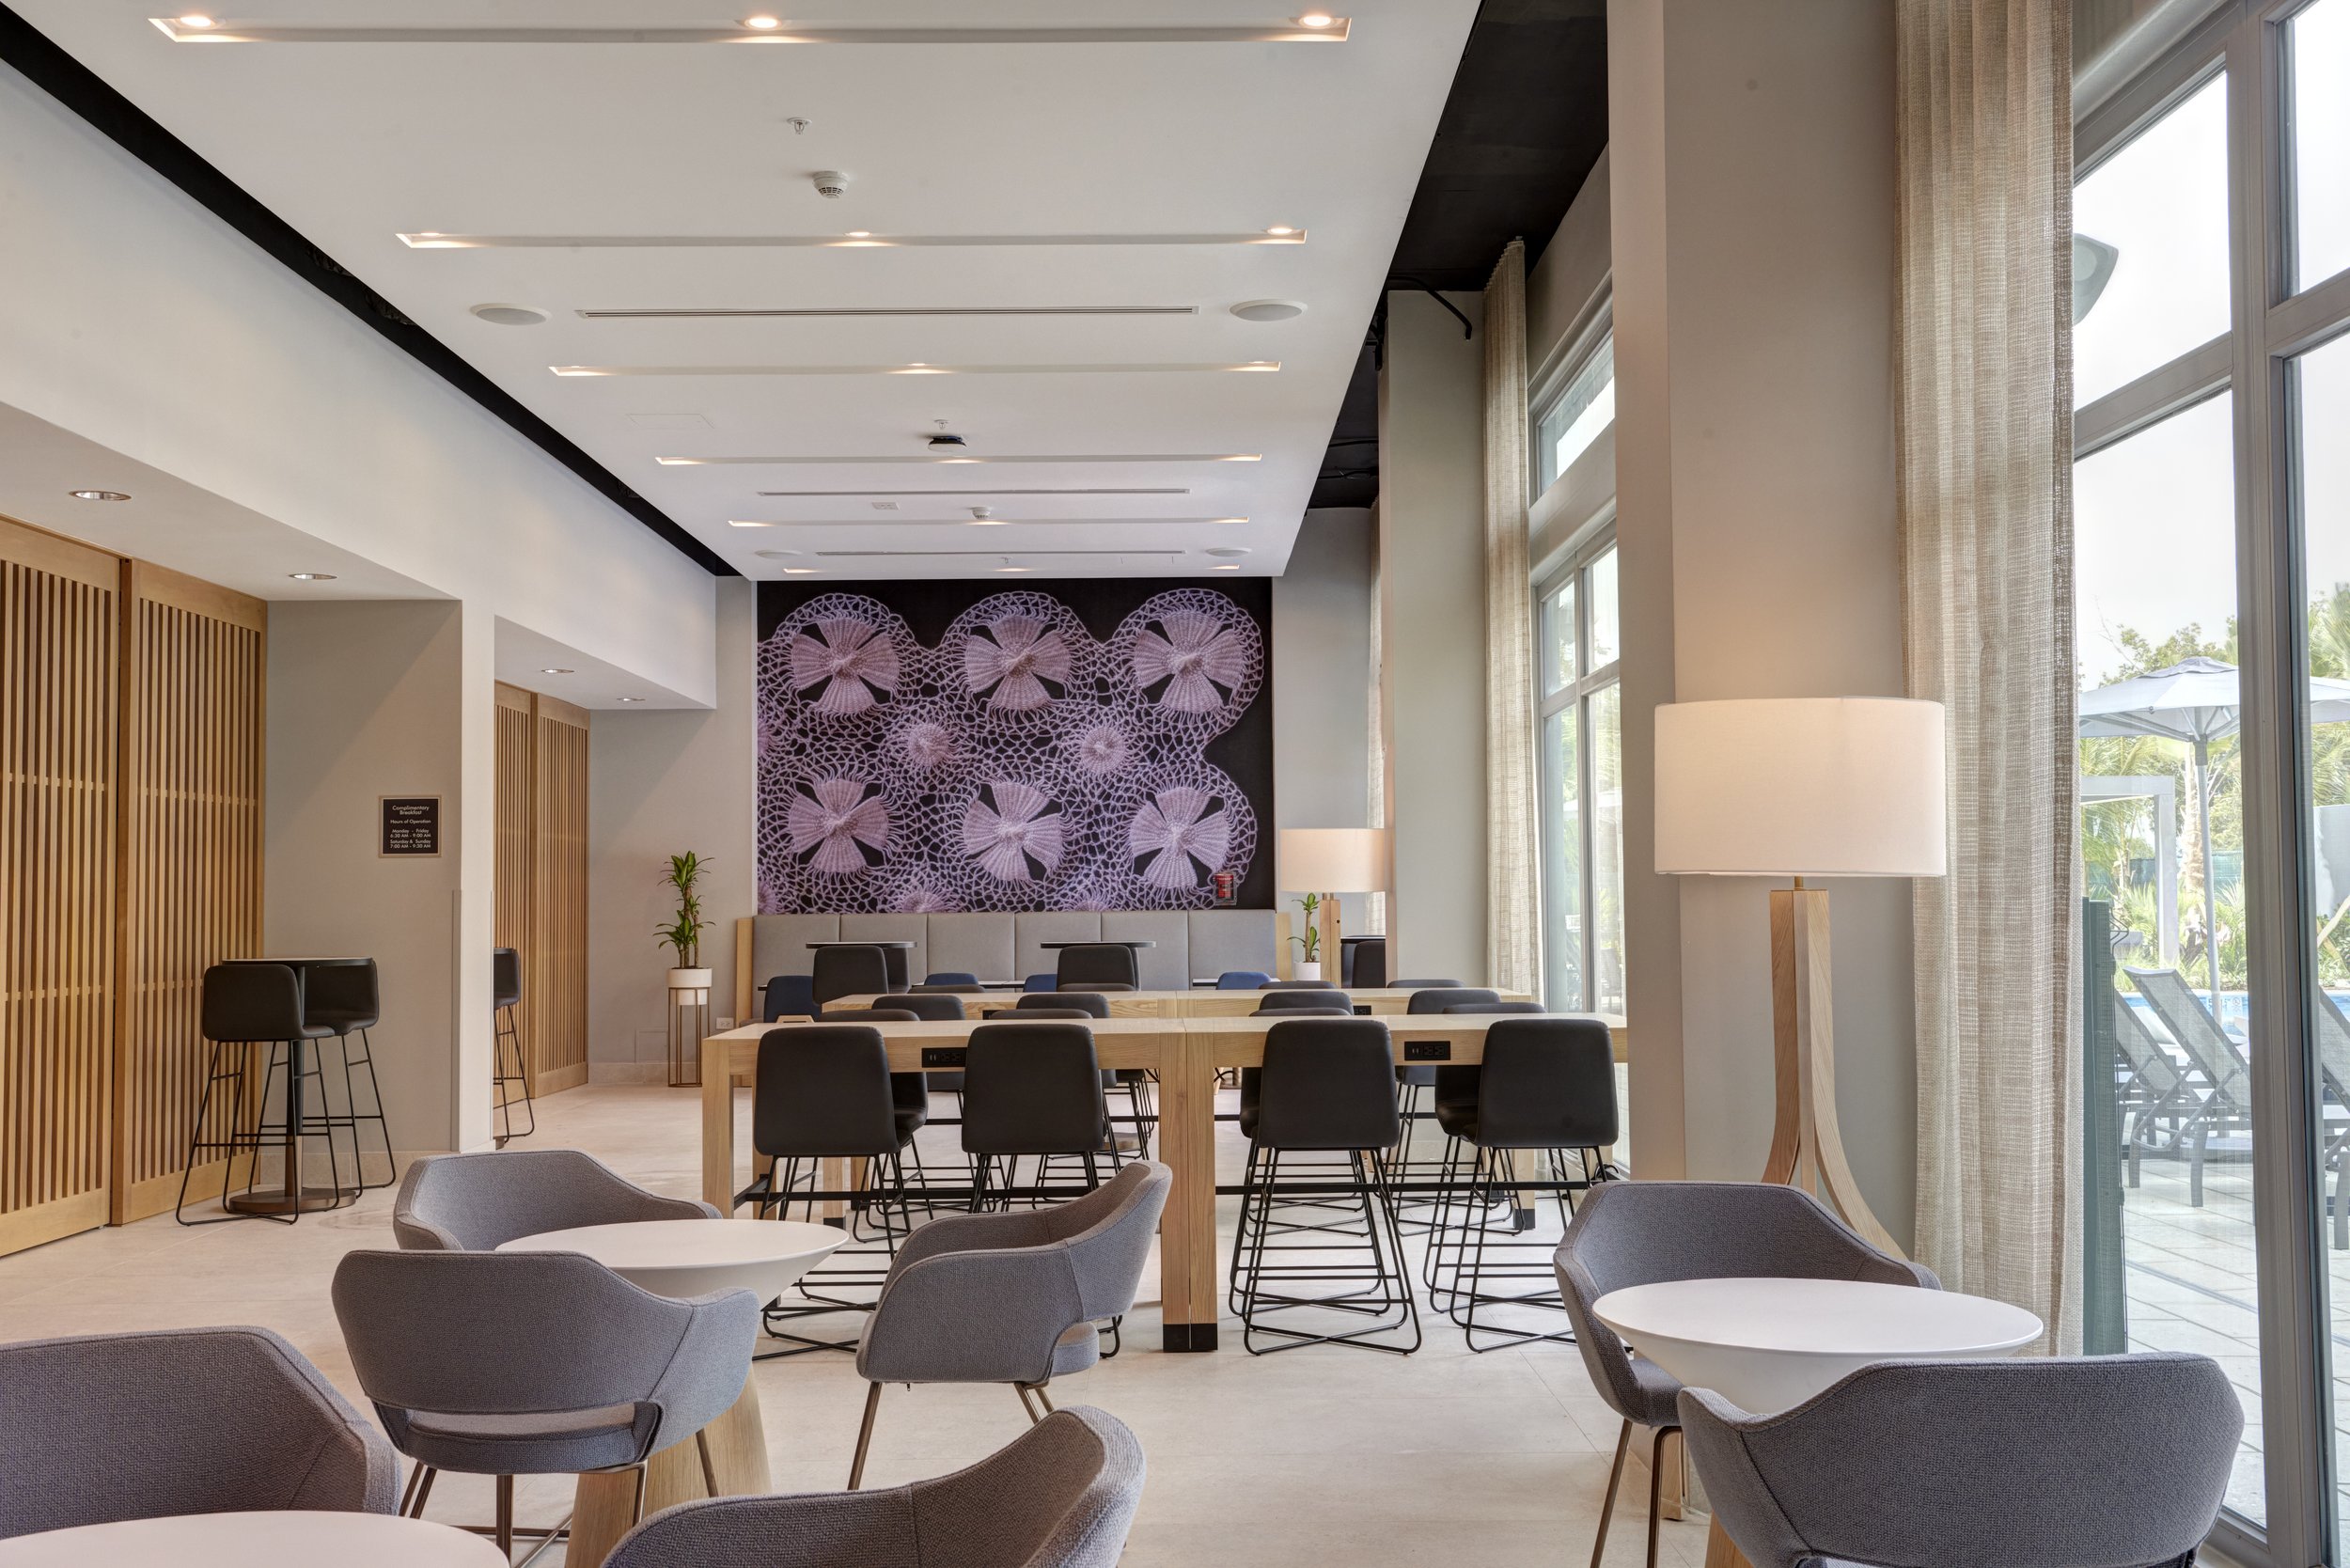  Interior eating area of the Residence Inn by Marriott hospitality project. 